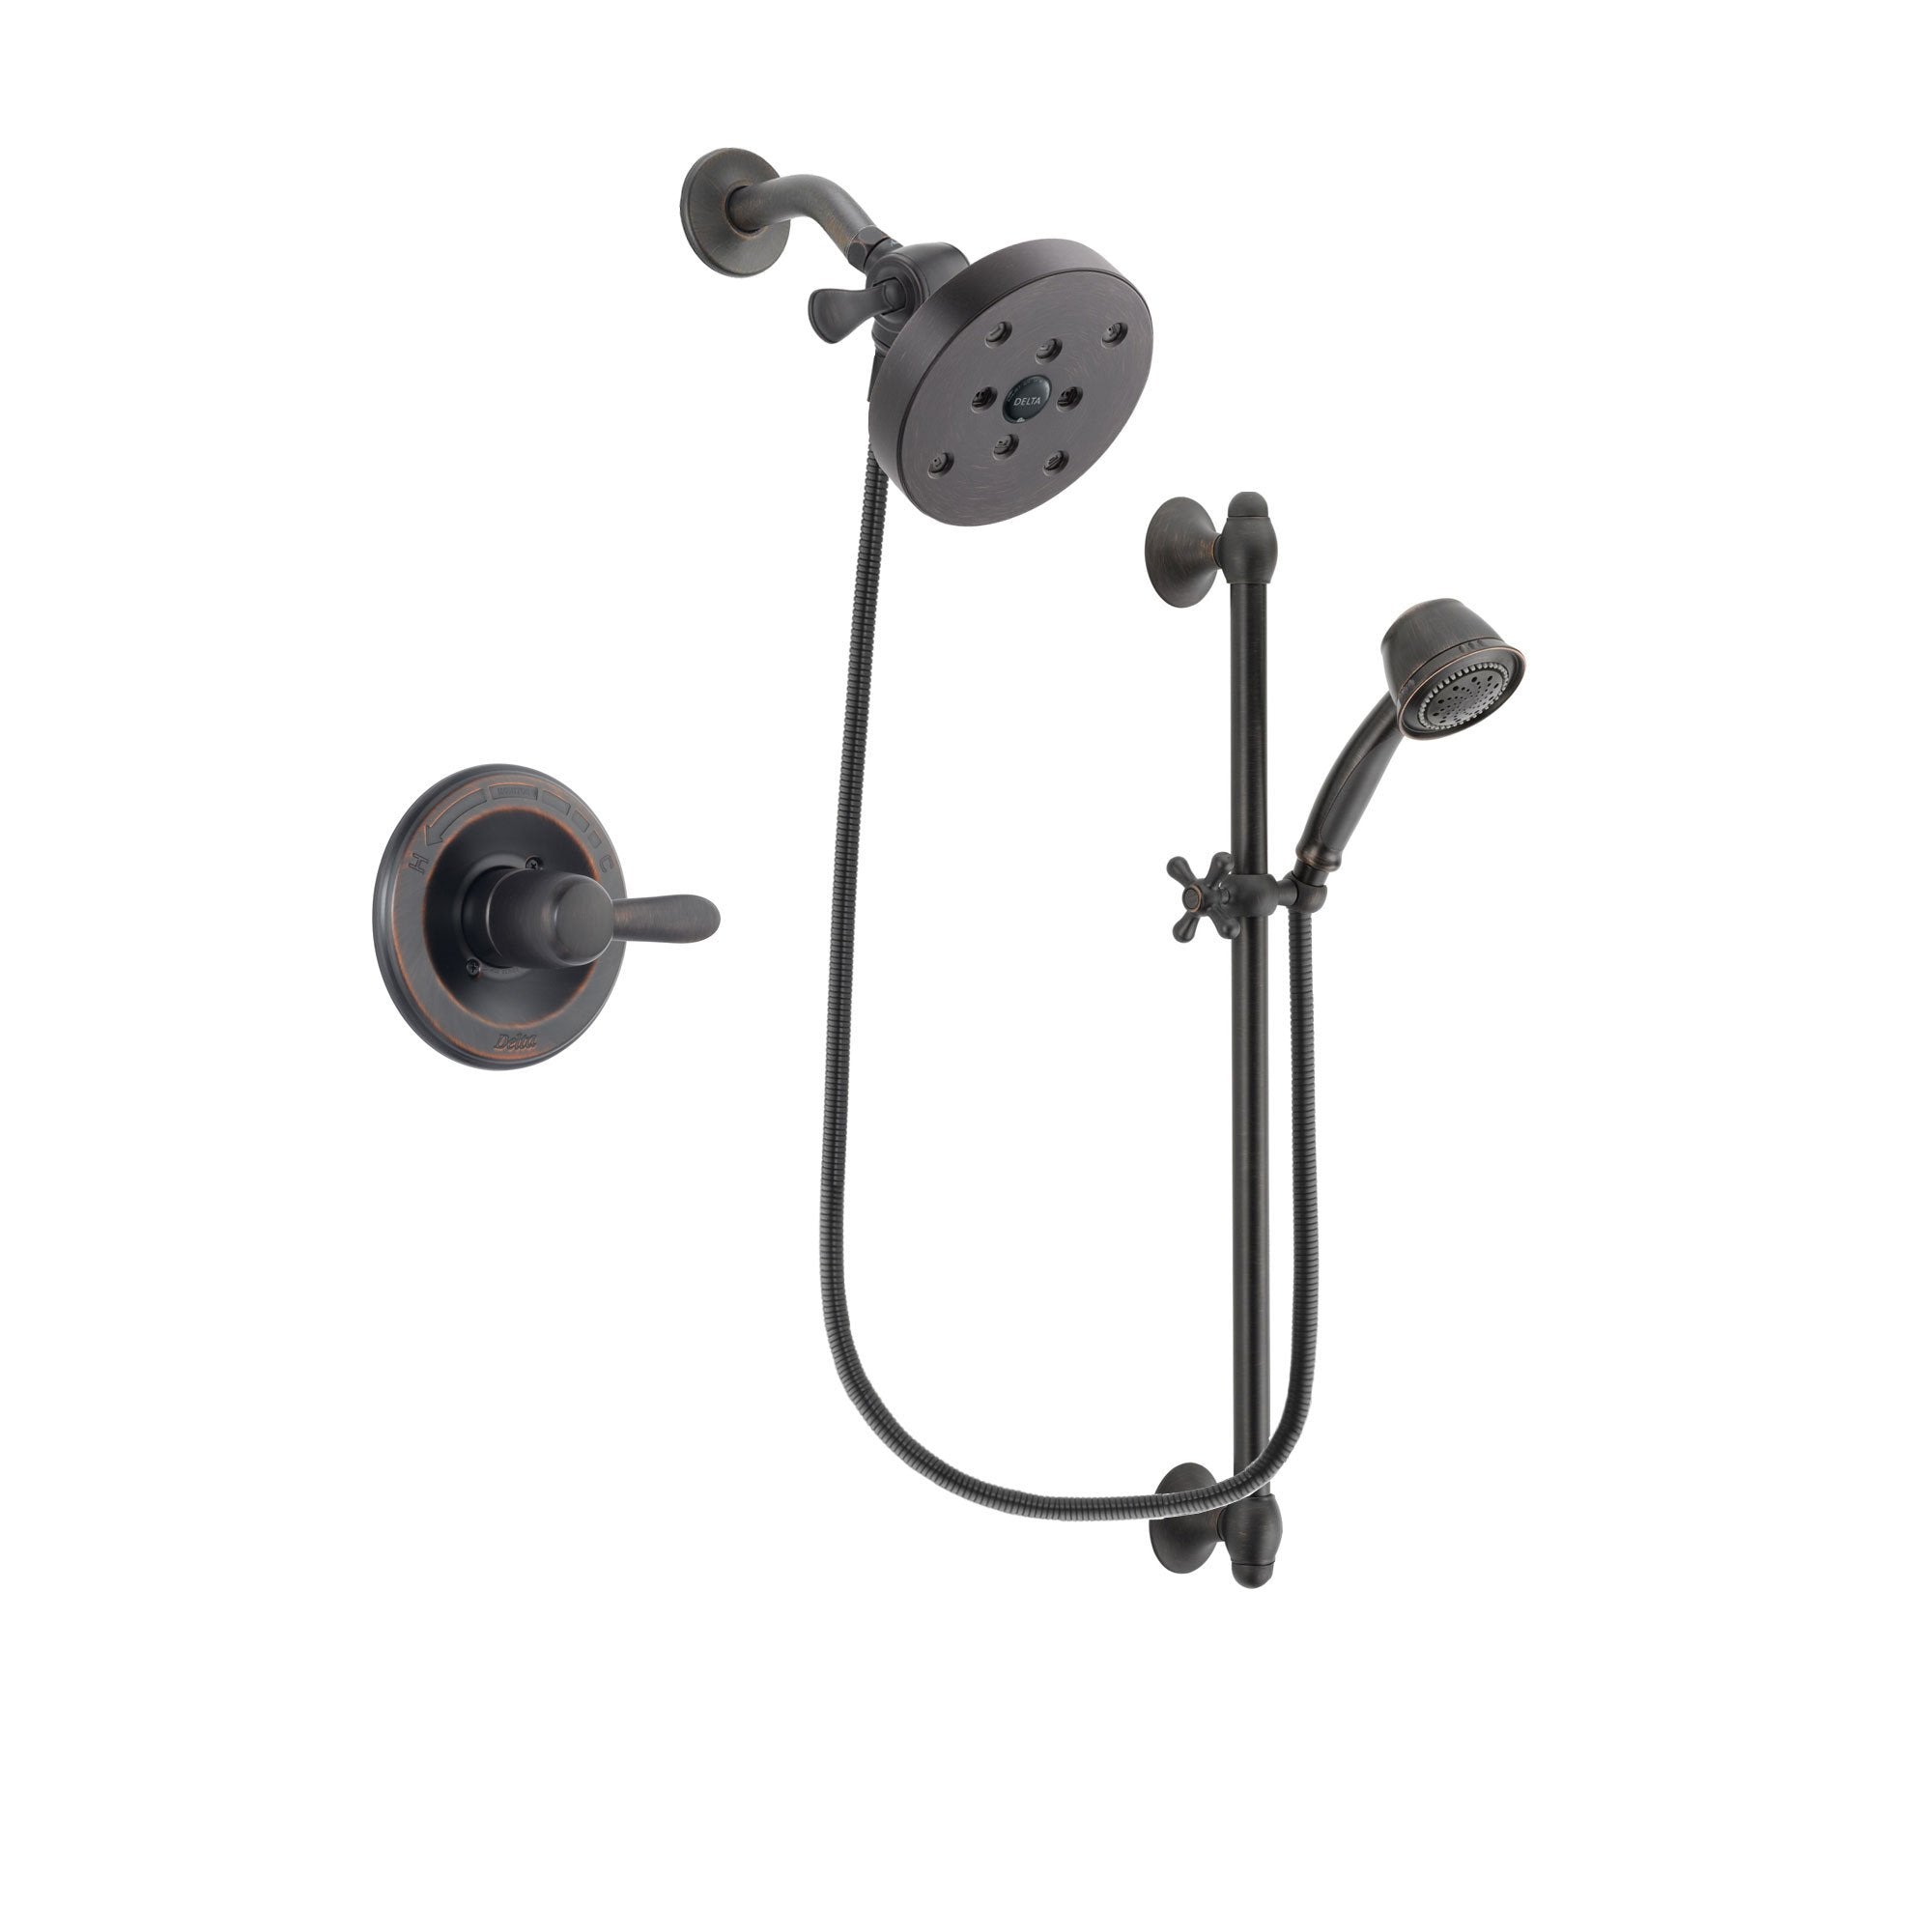 Delta Lahara Venetian Bronze Finish Shower Faucet System Package with 5-1/2 inch Showerhead and 5-Spray Personal Handshower with Slide Bar Includes Rough-in Valve DSP2602V